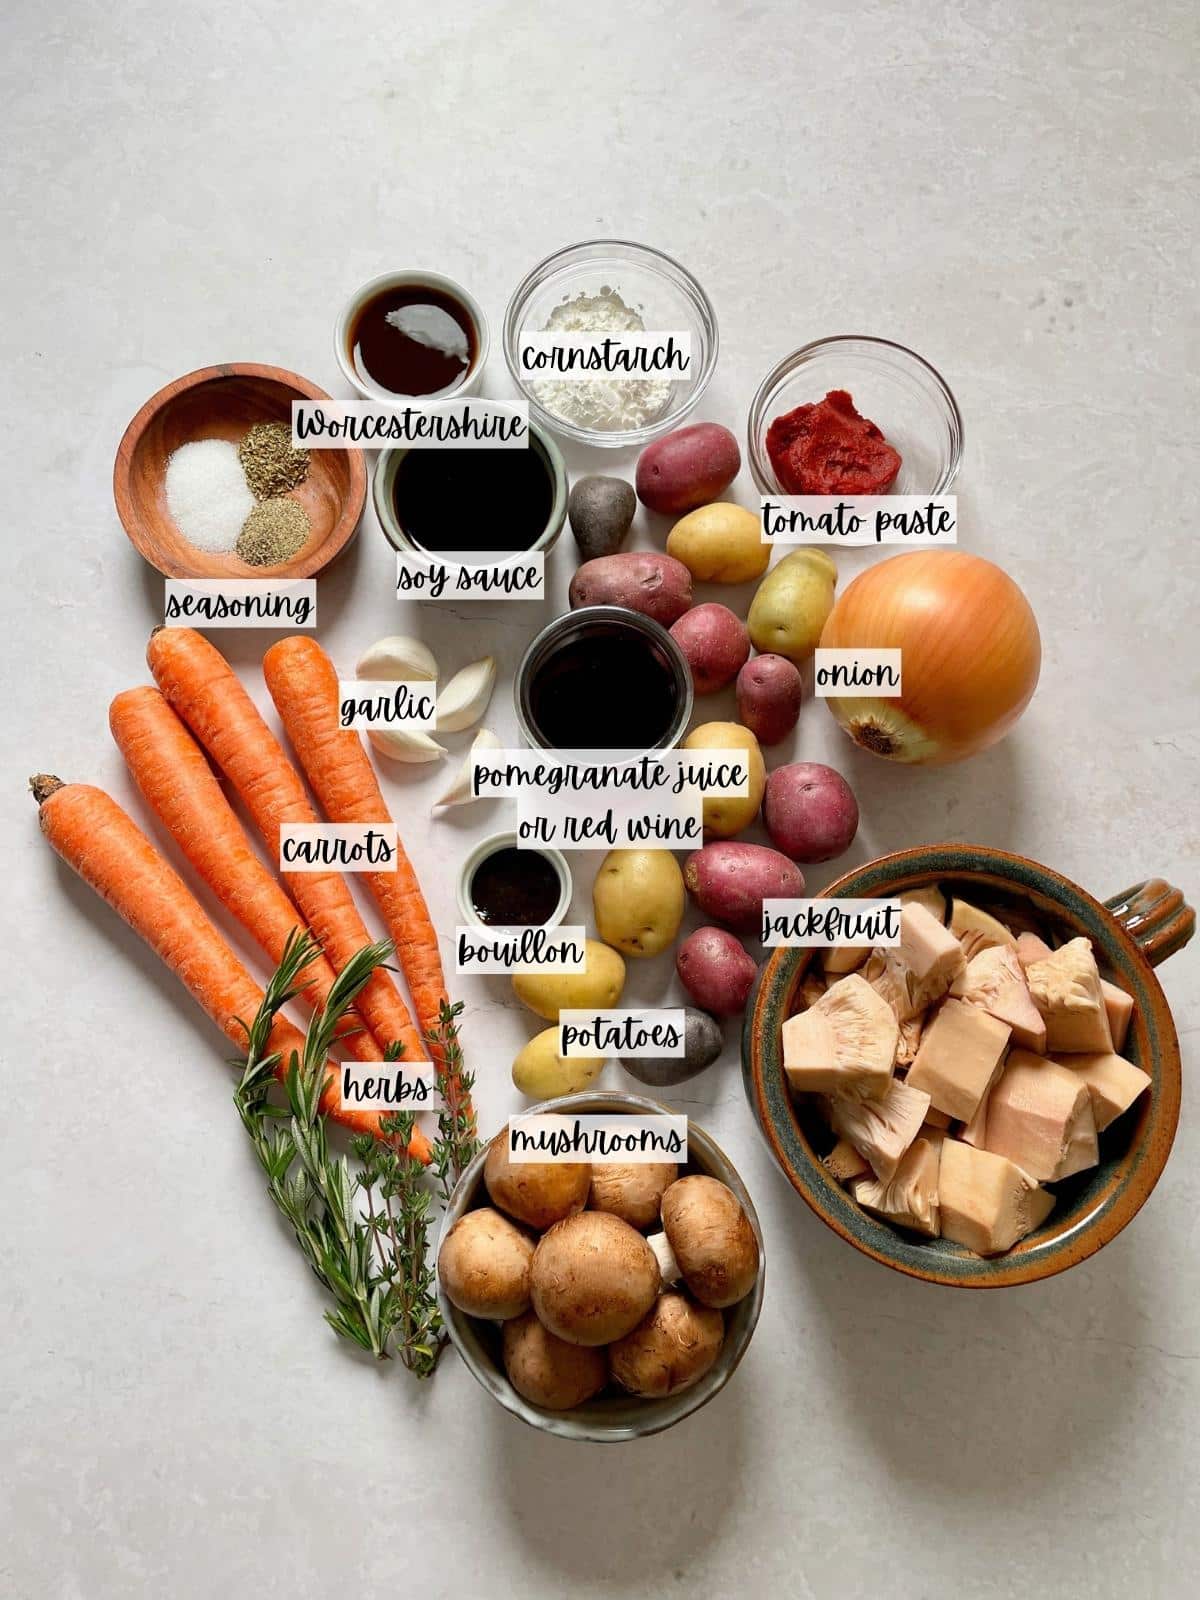 Labeled ingredients for pot roast.